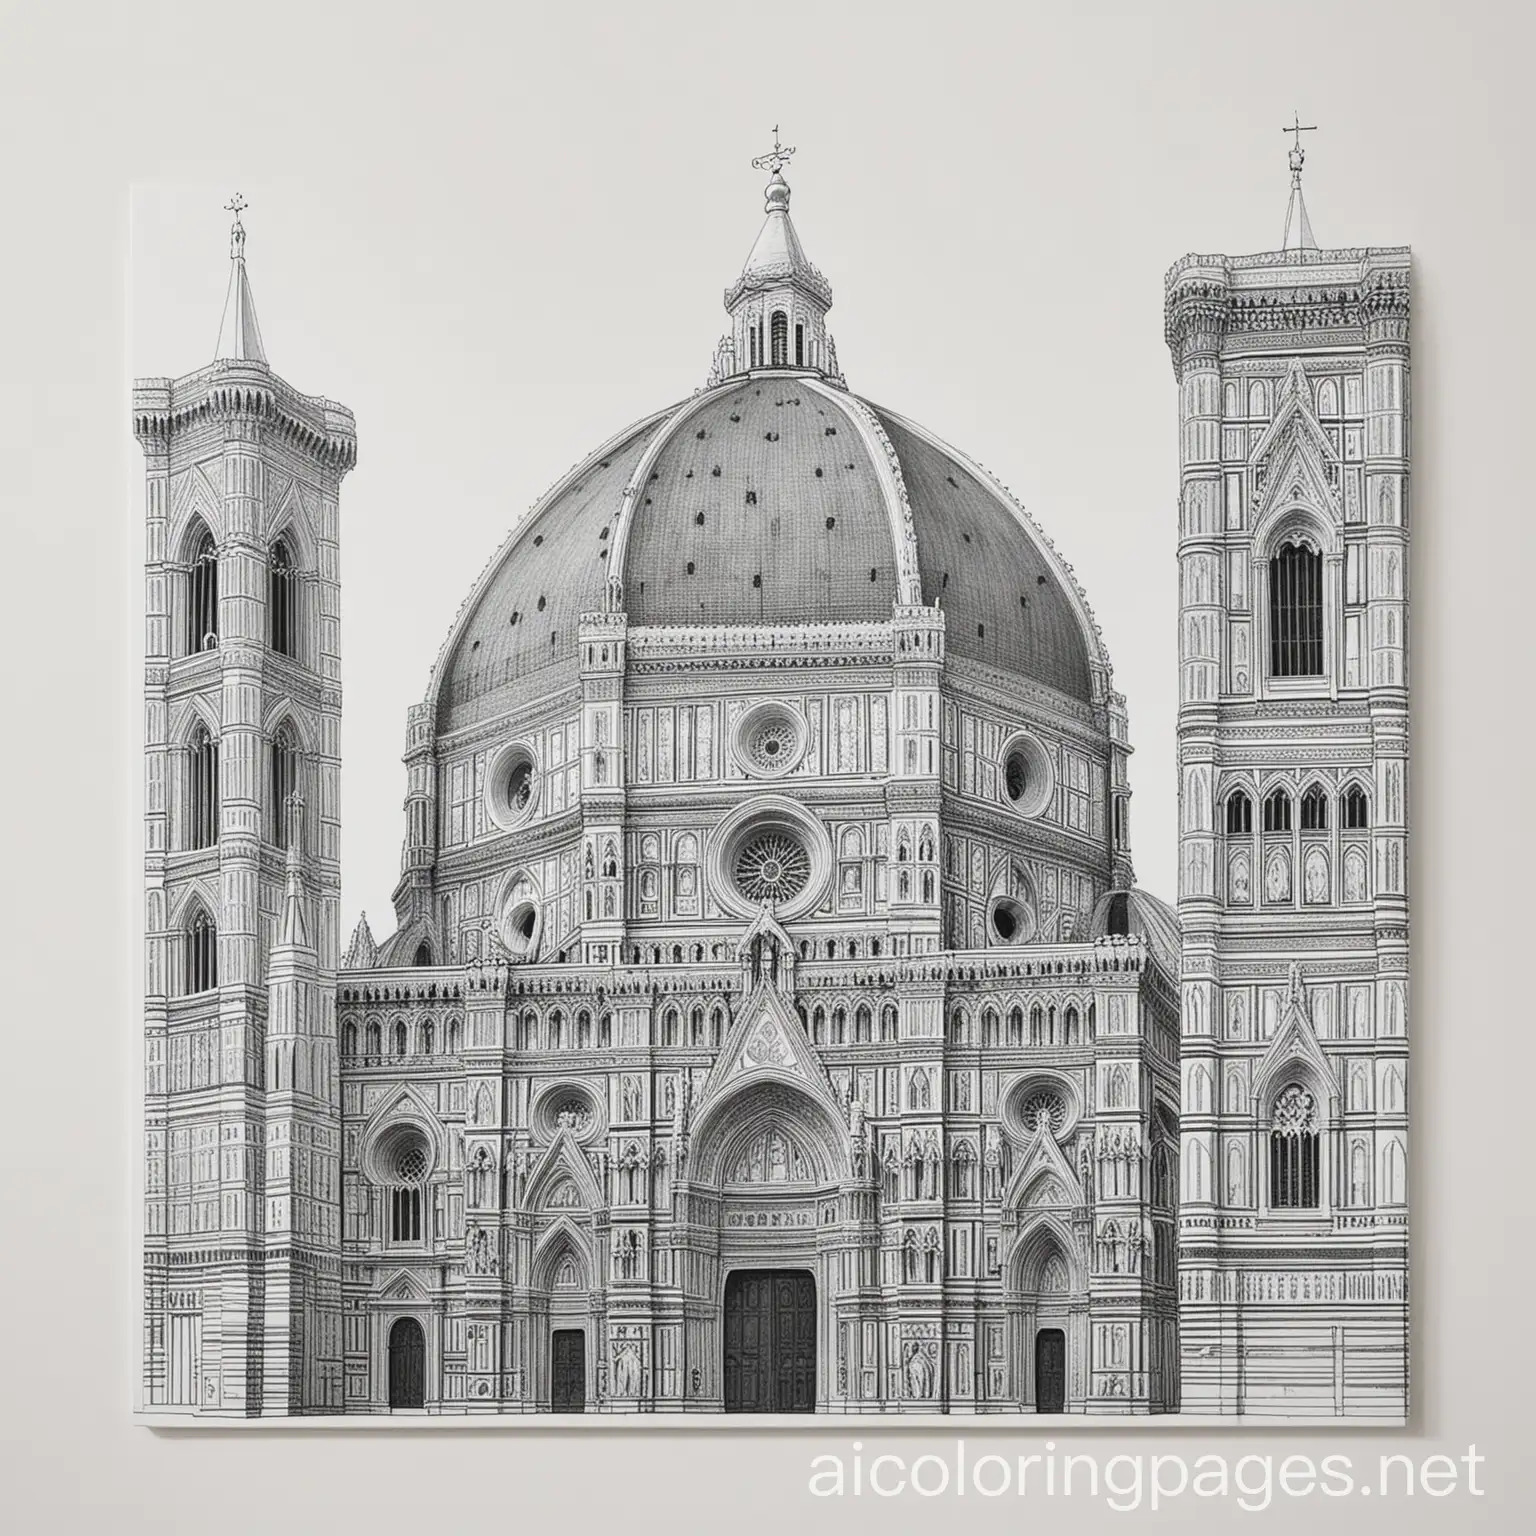 Duomo Florence Italy Grey and White, Coloring Page, black and white, line art, white background, Simplicity, Ample White Space. The background of the coloring page is plain white to make it easy for young children to color within the lines. The outlines of all the subjects are easy to distinguish, making it simple for kids to color without too much difficulty